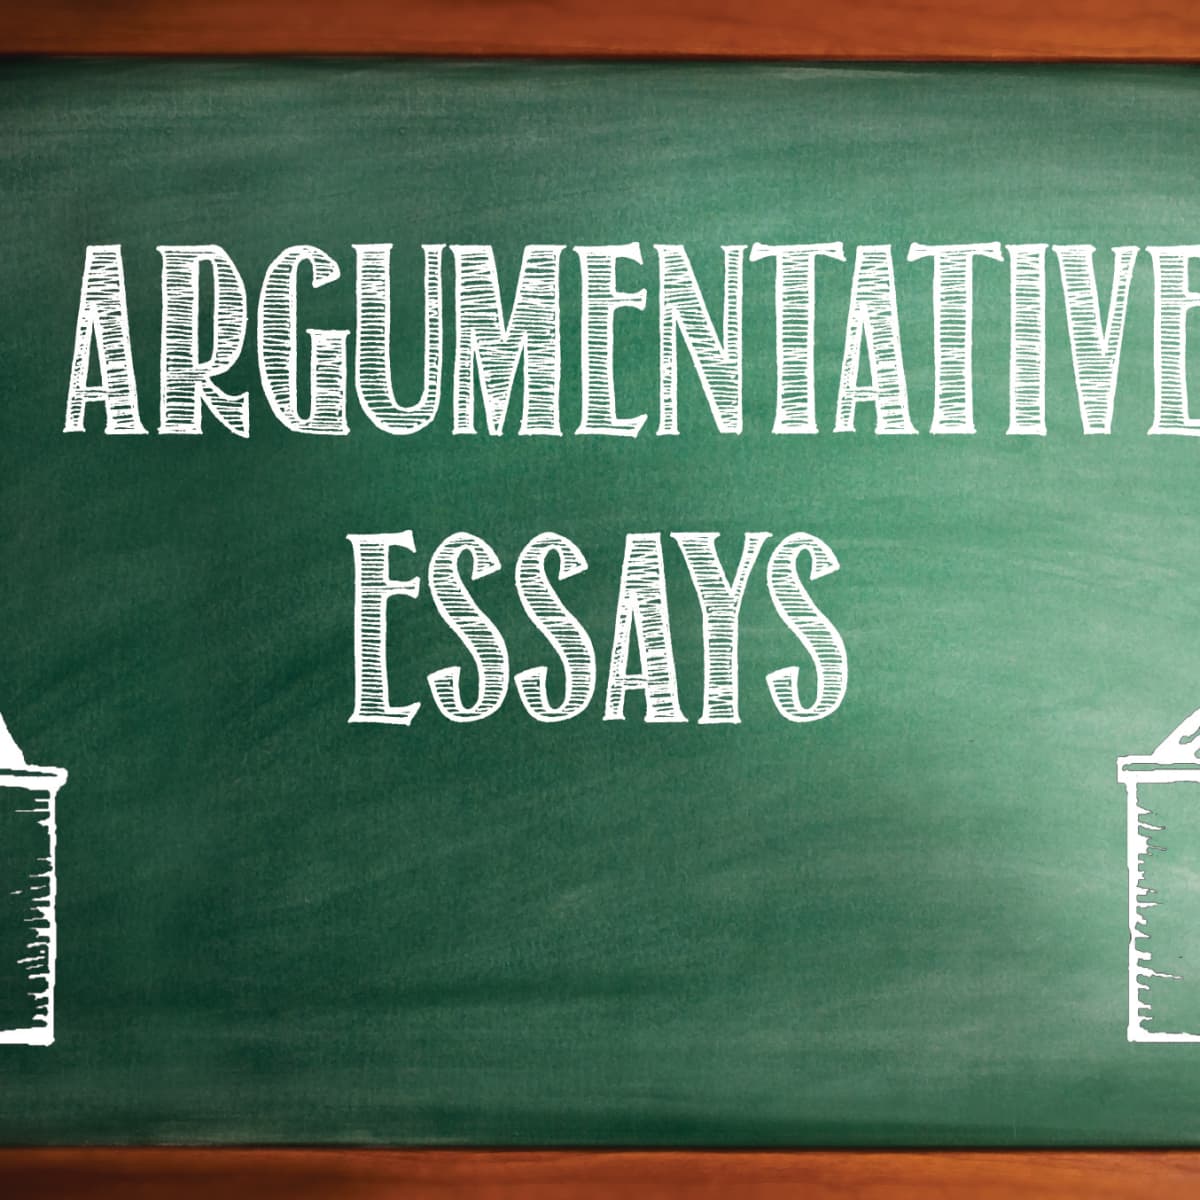 argumentative topics to write about